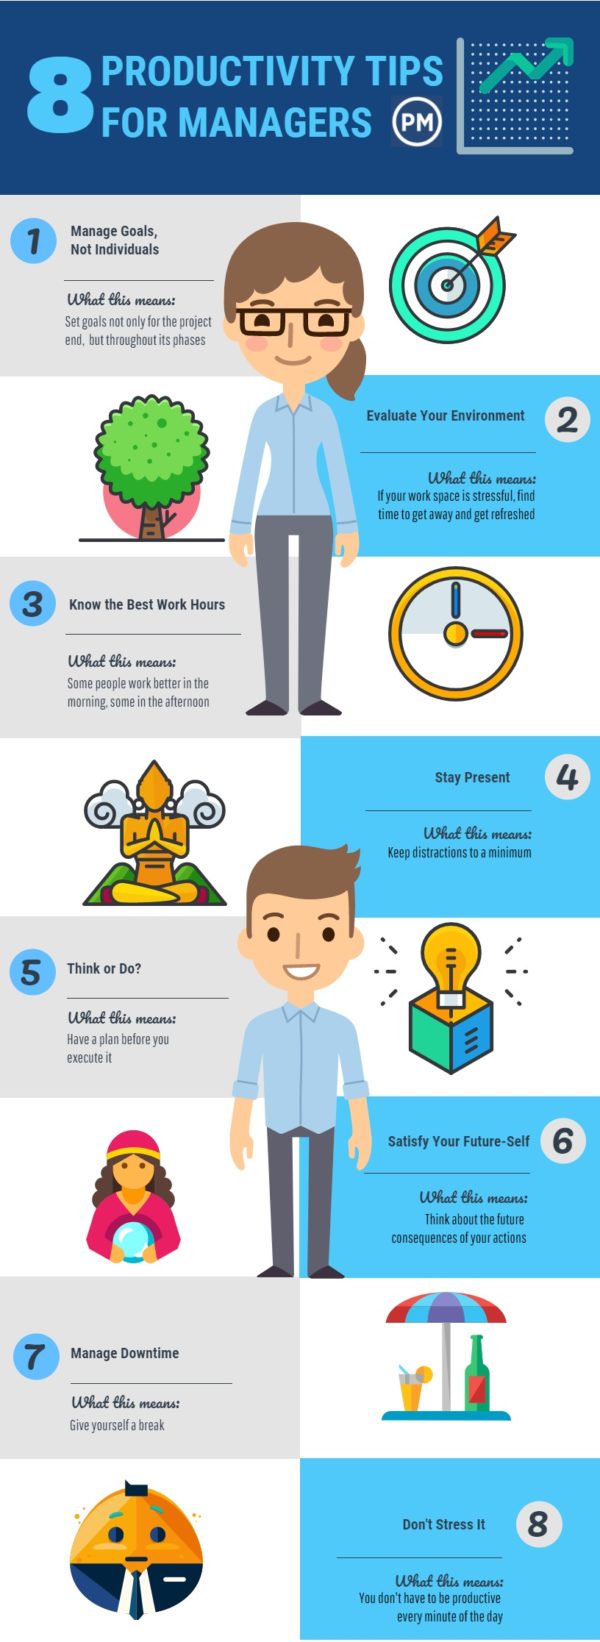 8 Productivity Secrets of Successful Managers